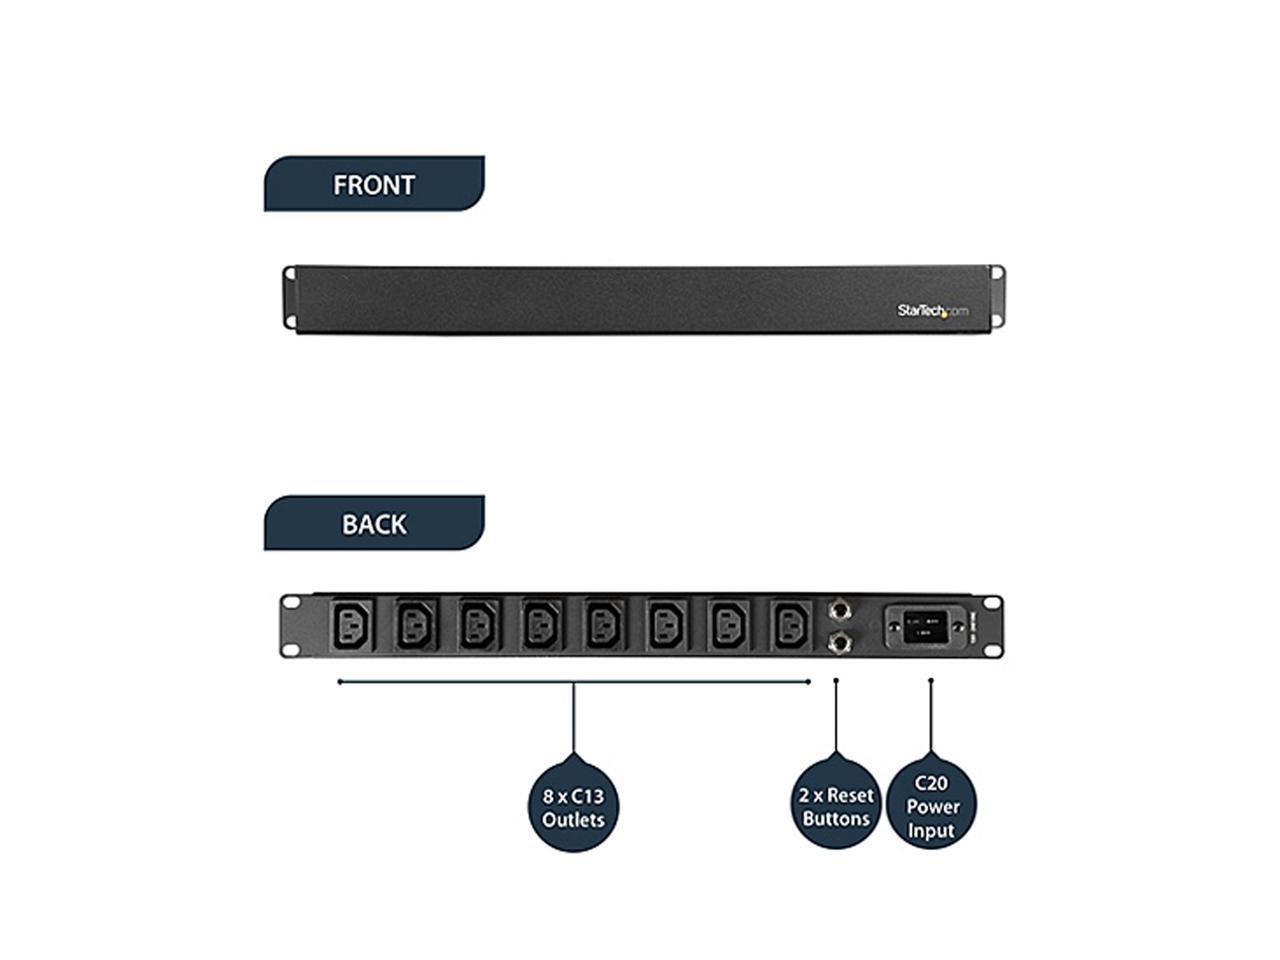 StarTech PDU08C13H 8-Port Rack-Mount PDU with C13 Outlets - 10 ft. Power Cord (N